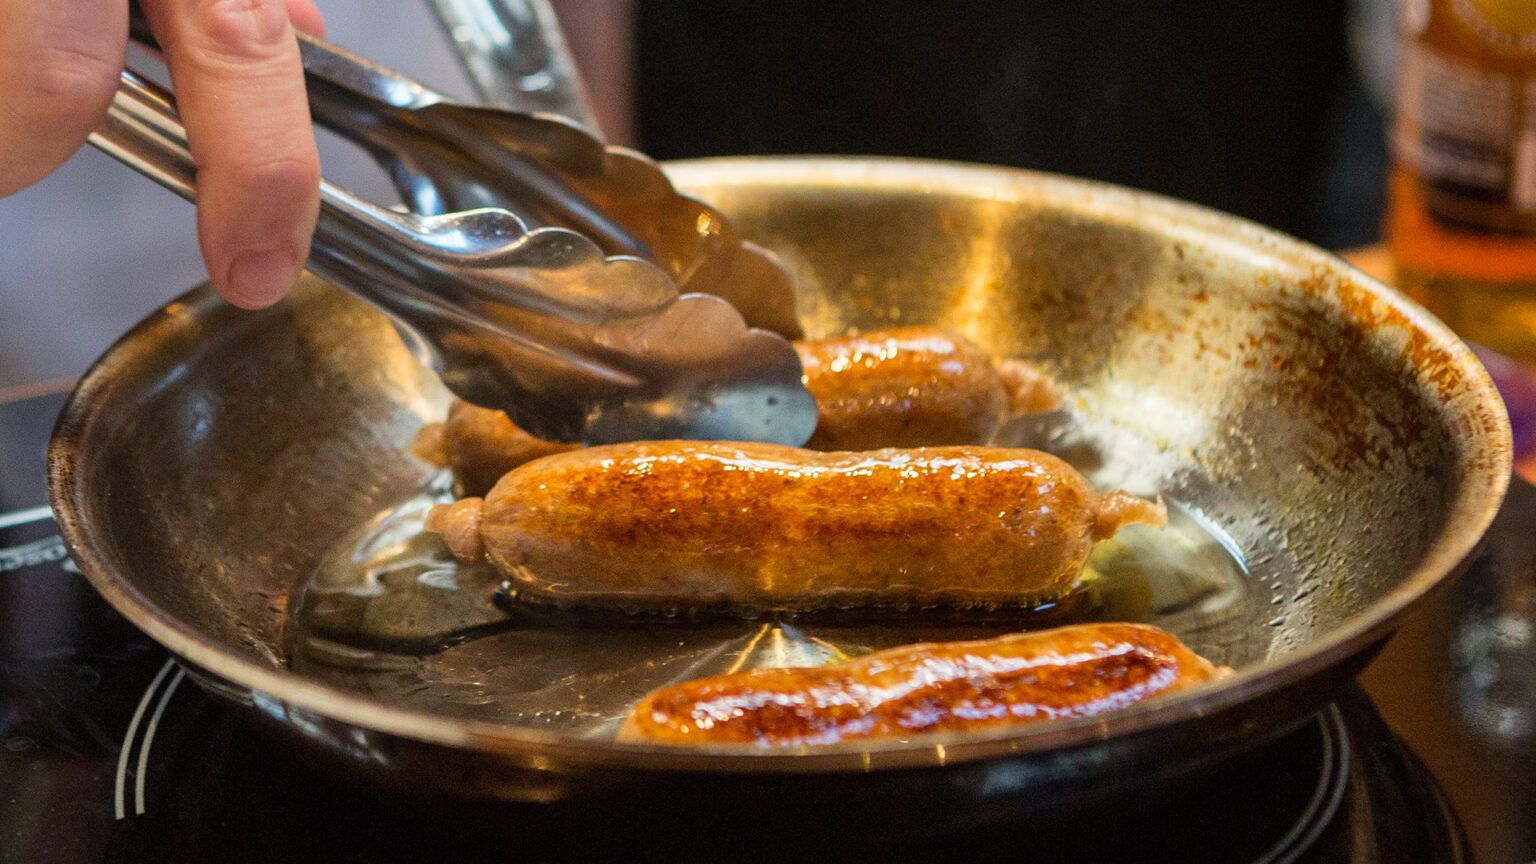 A hand holding a pair of metal tongs turns one of three cultivated meat pork sausages cooking in a metal frying pan.